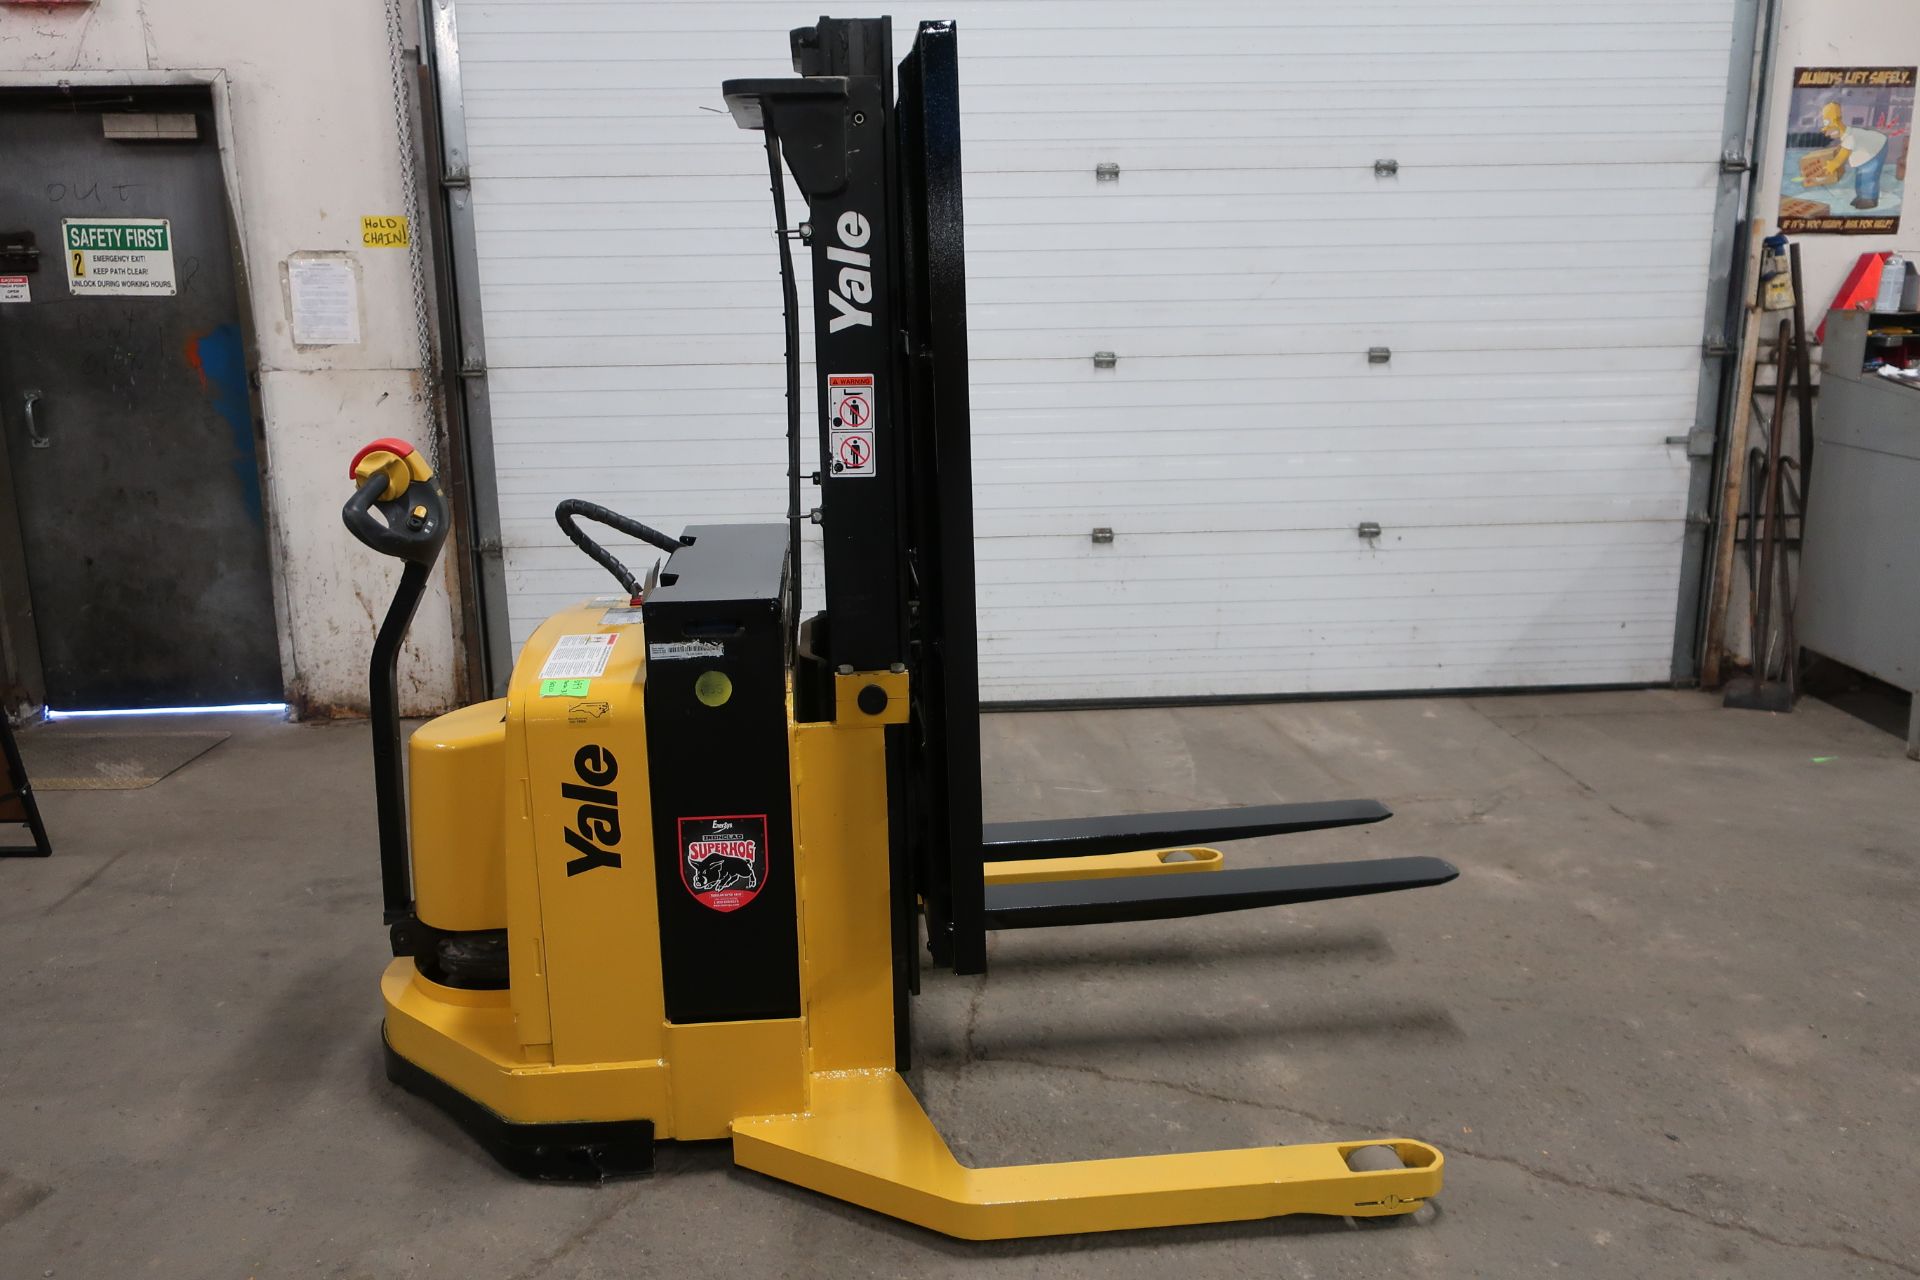 2008 Yale Stacker Order Picker Pallet Lifter unit 4000lbs capacity ELECTRIC VERY LOW HOURS